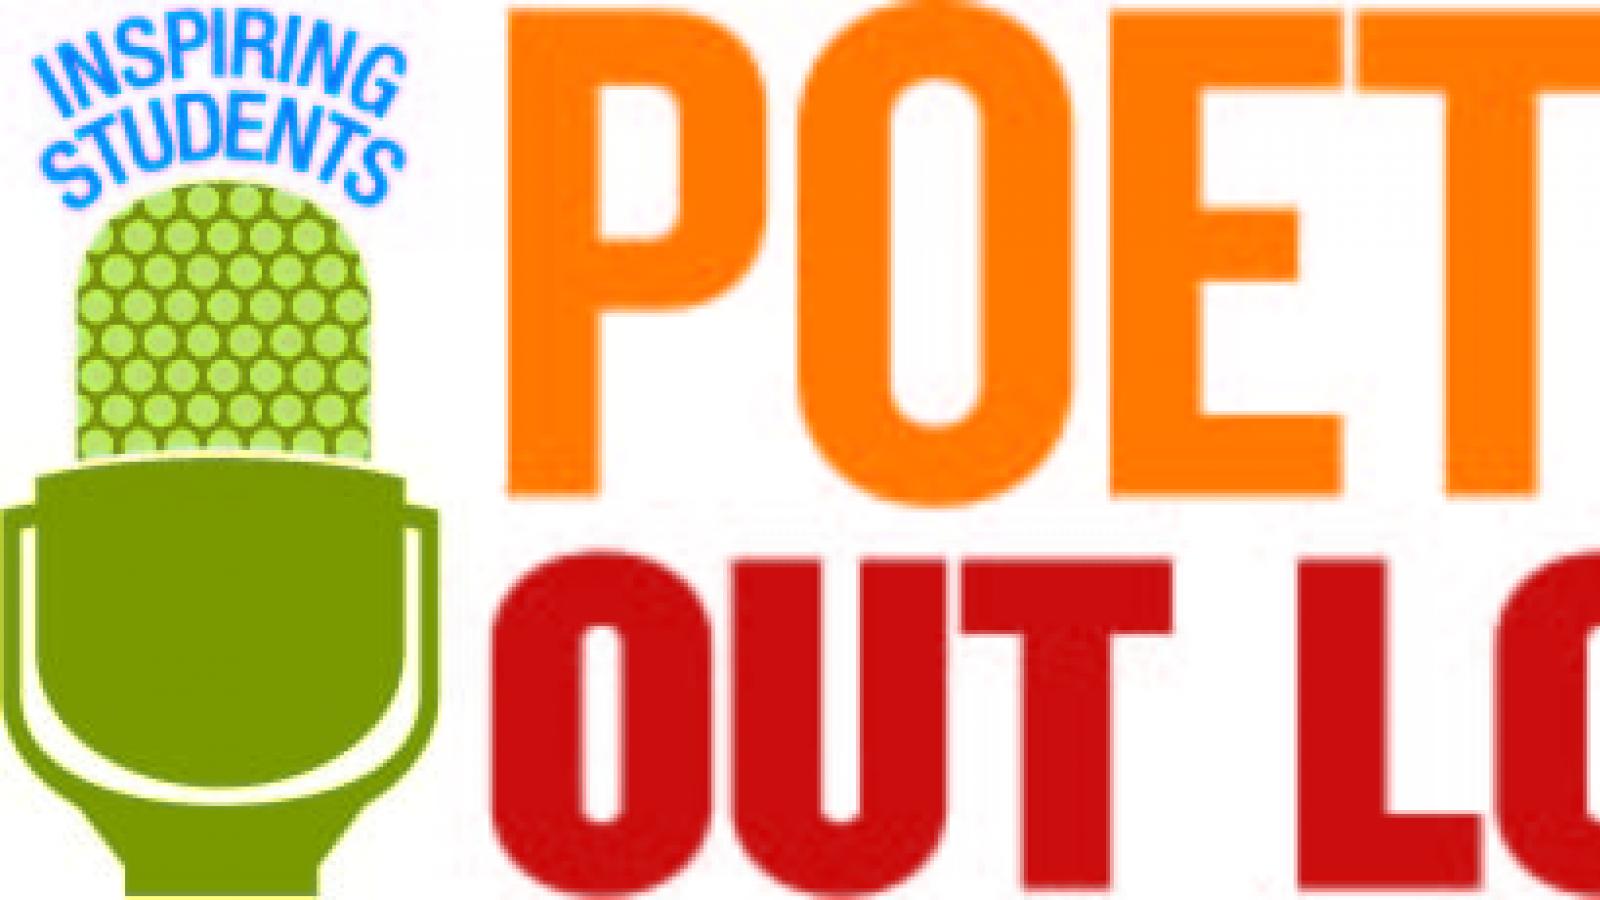 Poetry Out Loud logo